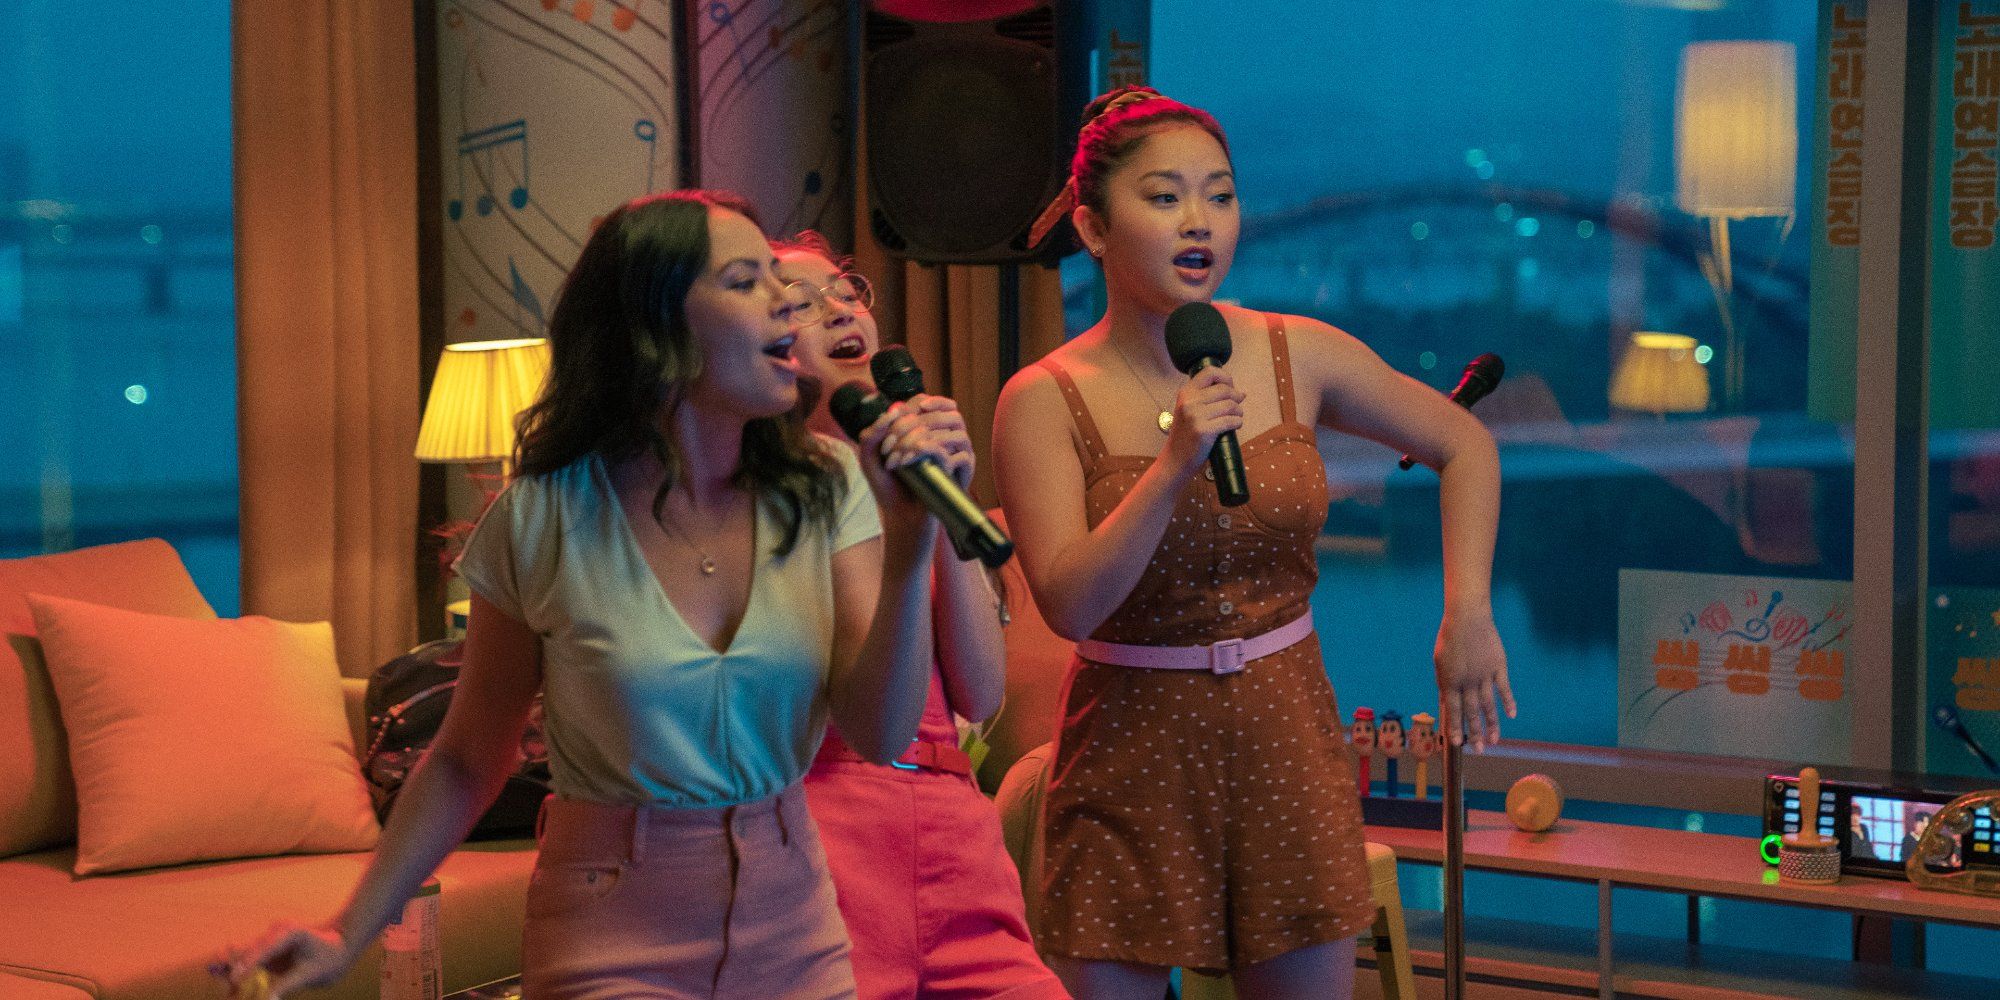 Janel Parrish, Anna Cathcart and Lana Condor singing in To All the Boys Always and Forever